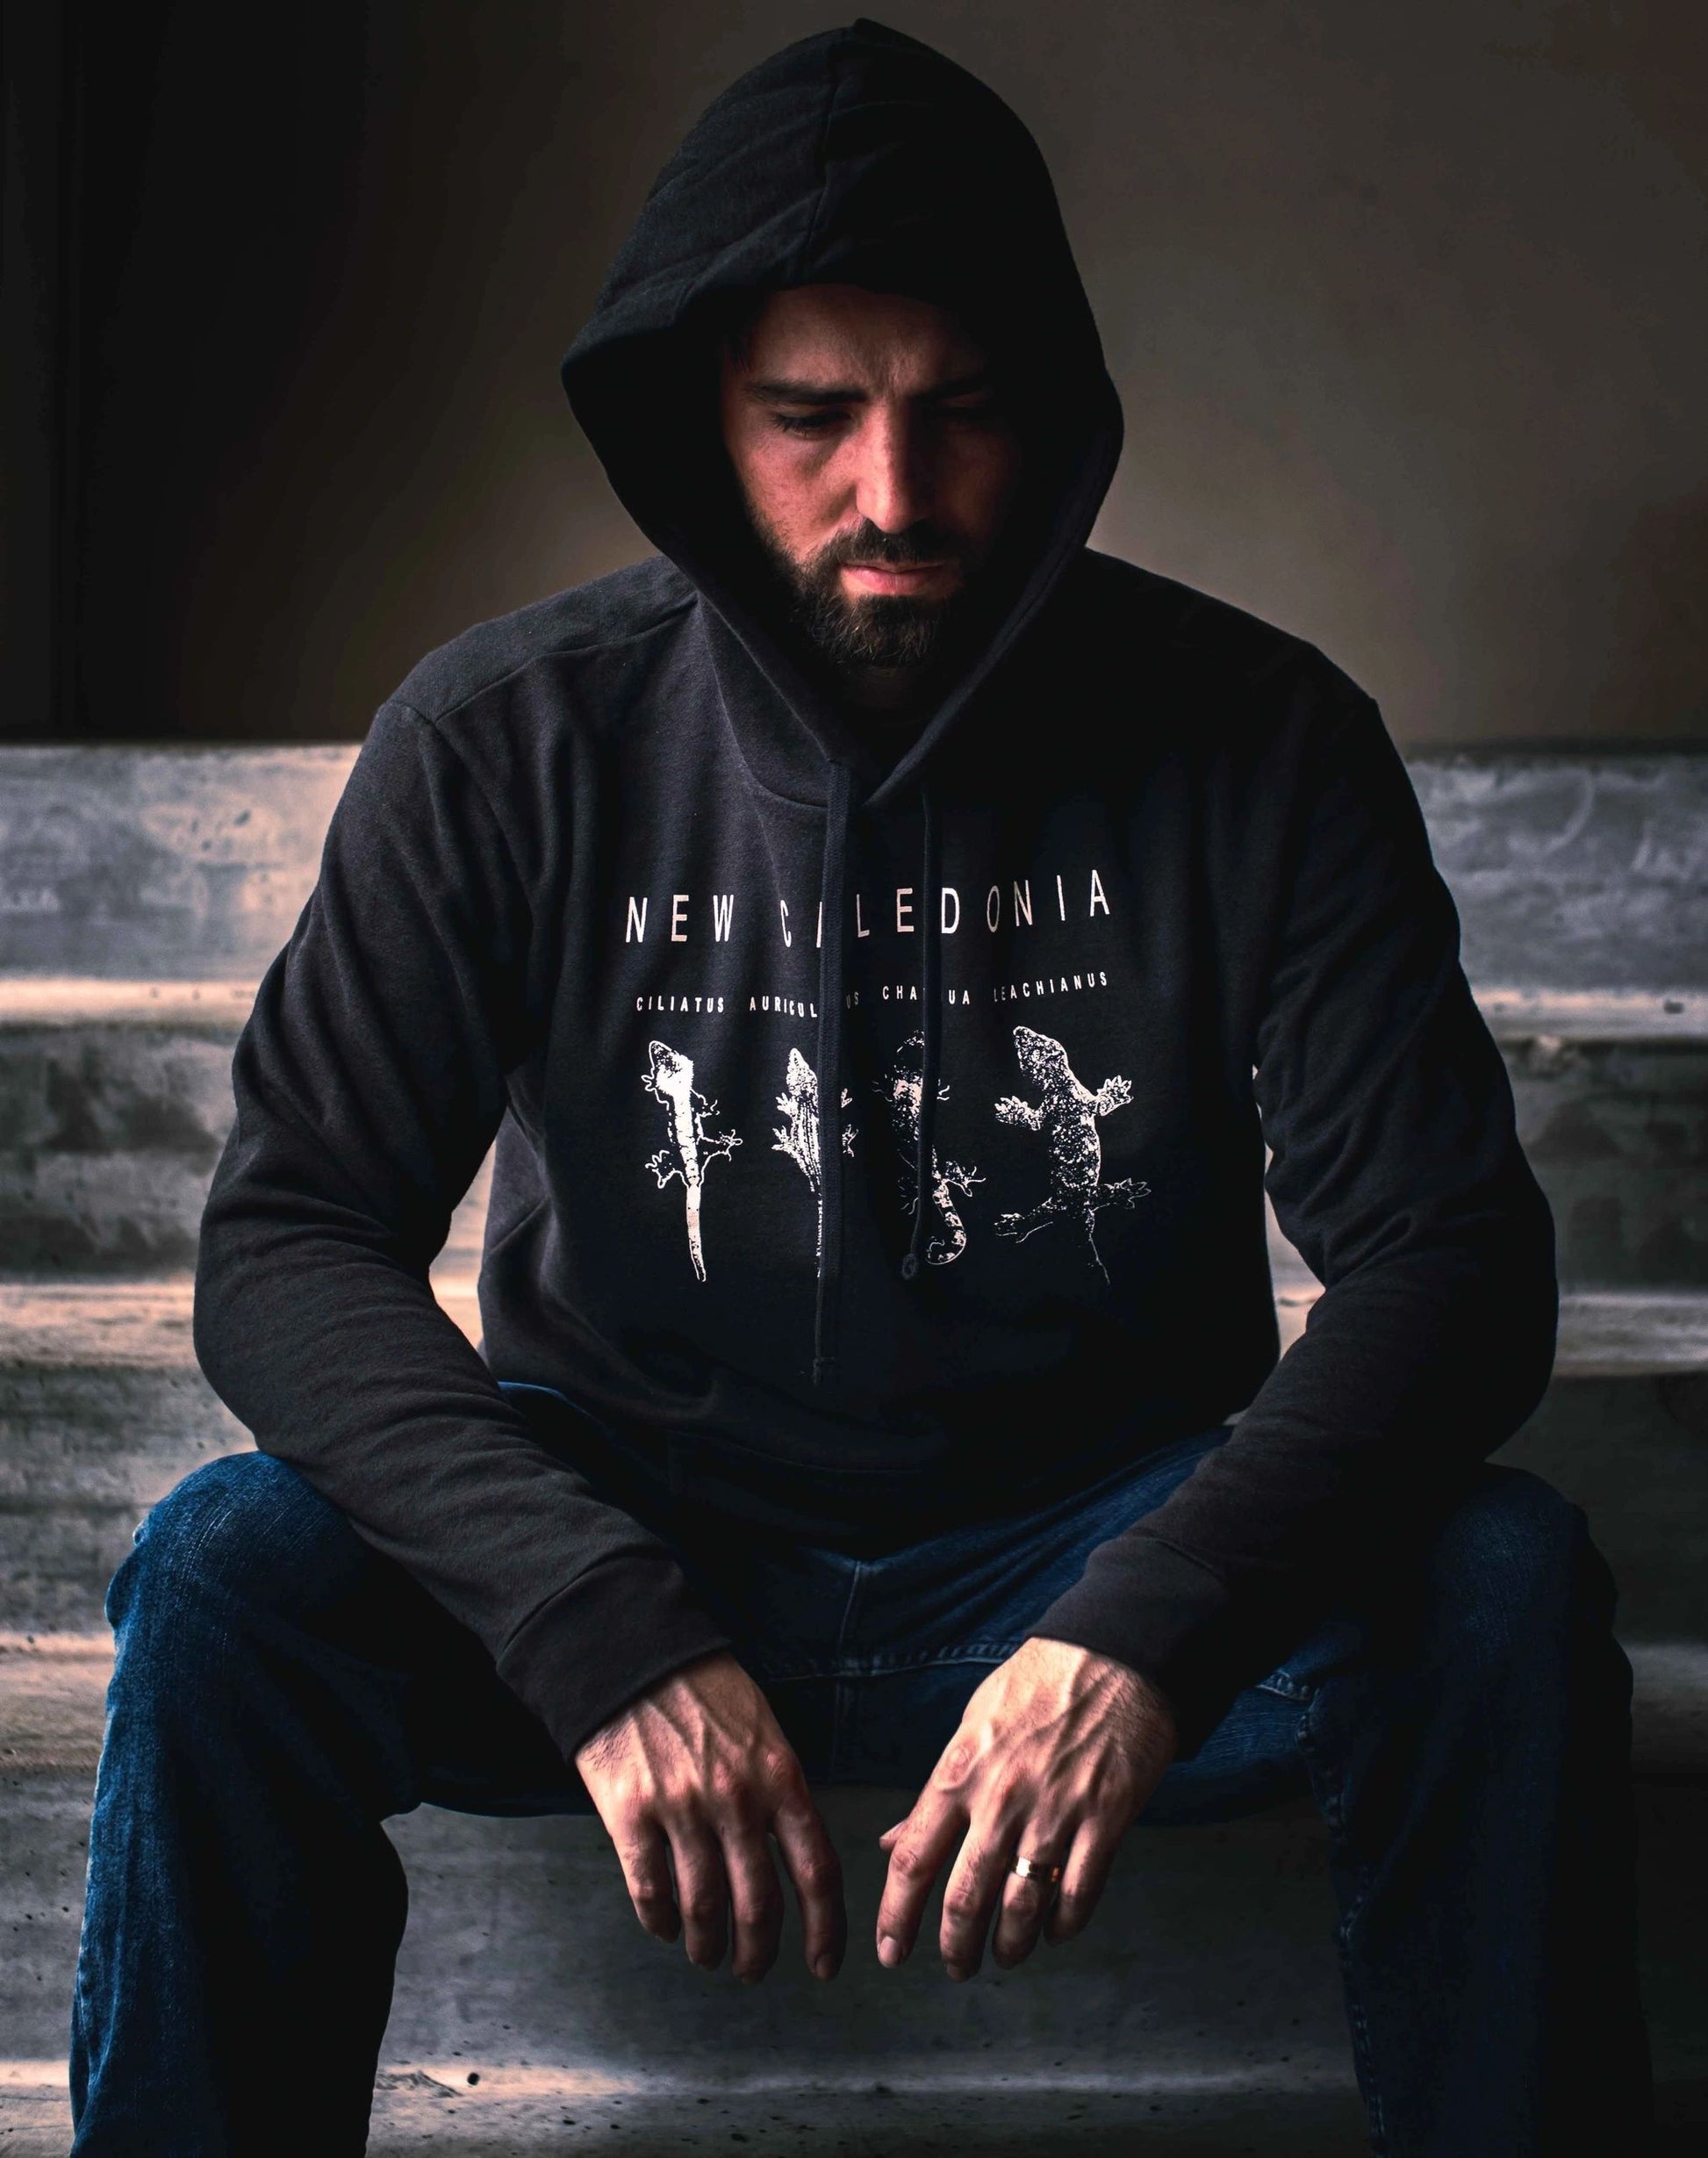 New Caledonia Hoodie (Second Edition)